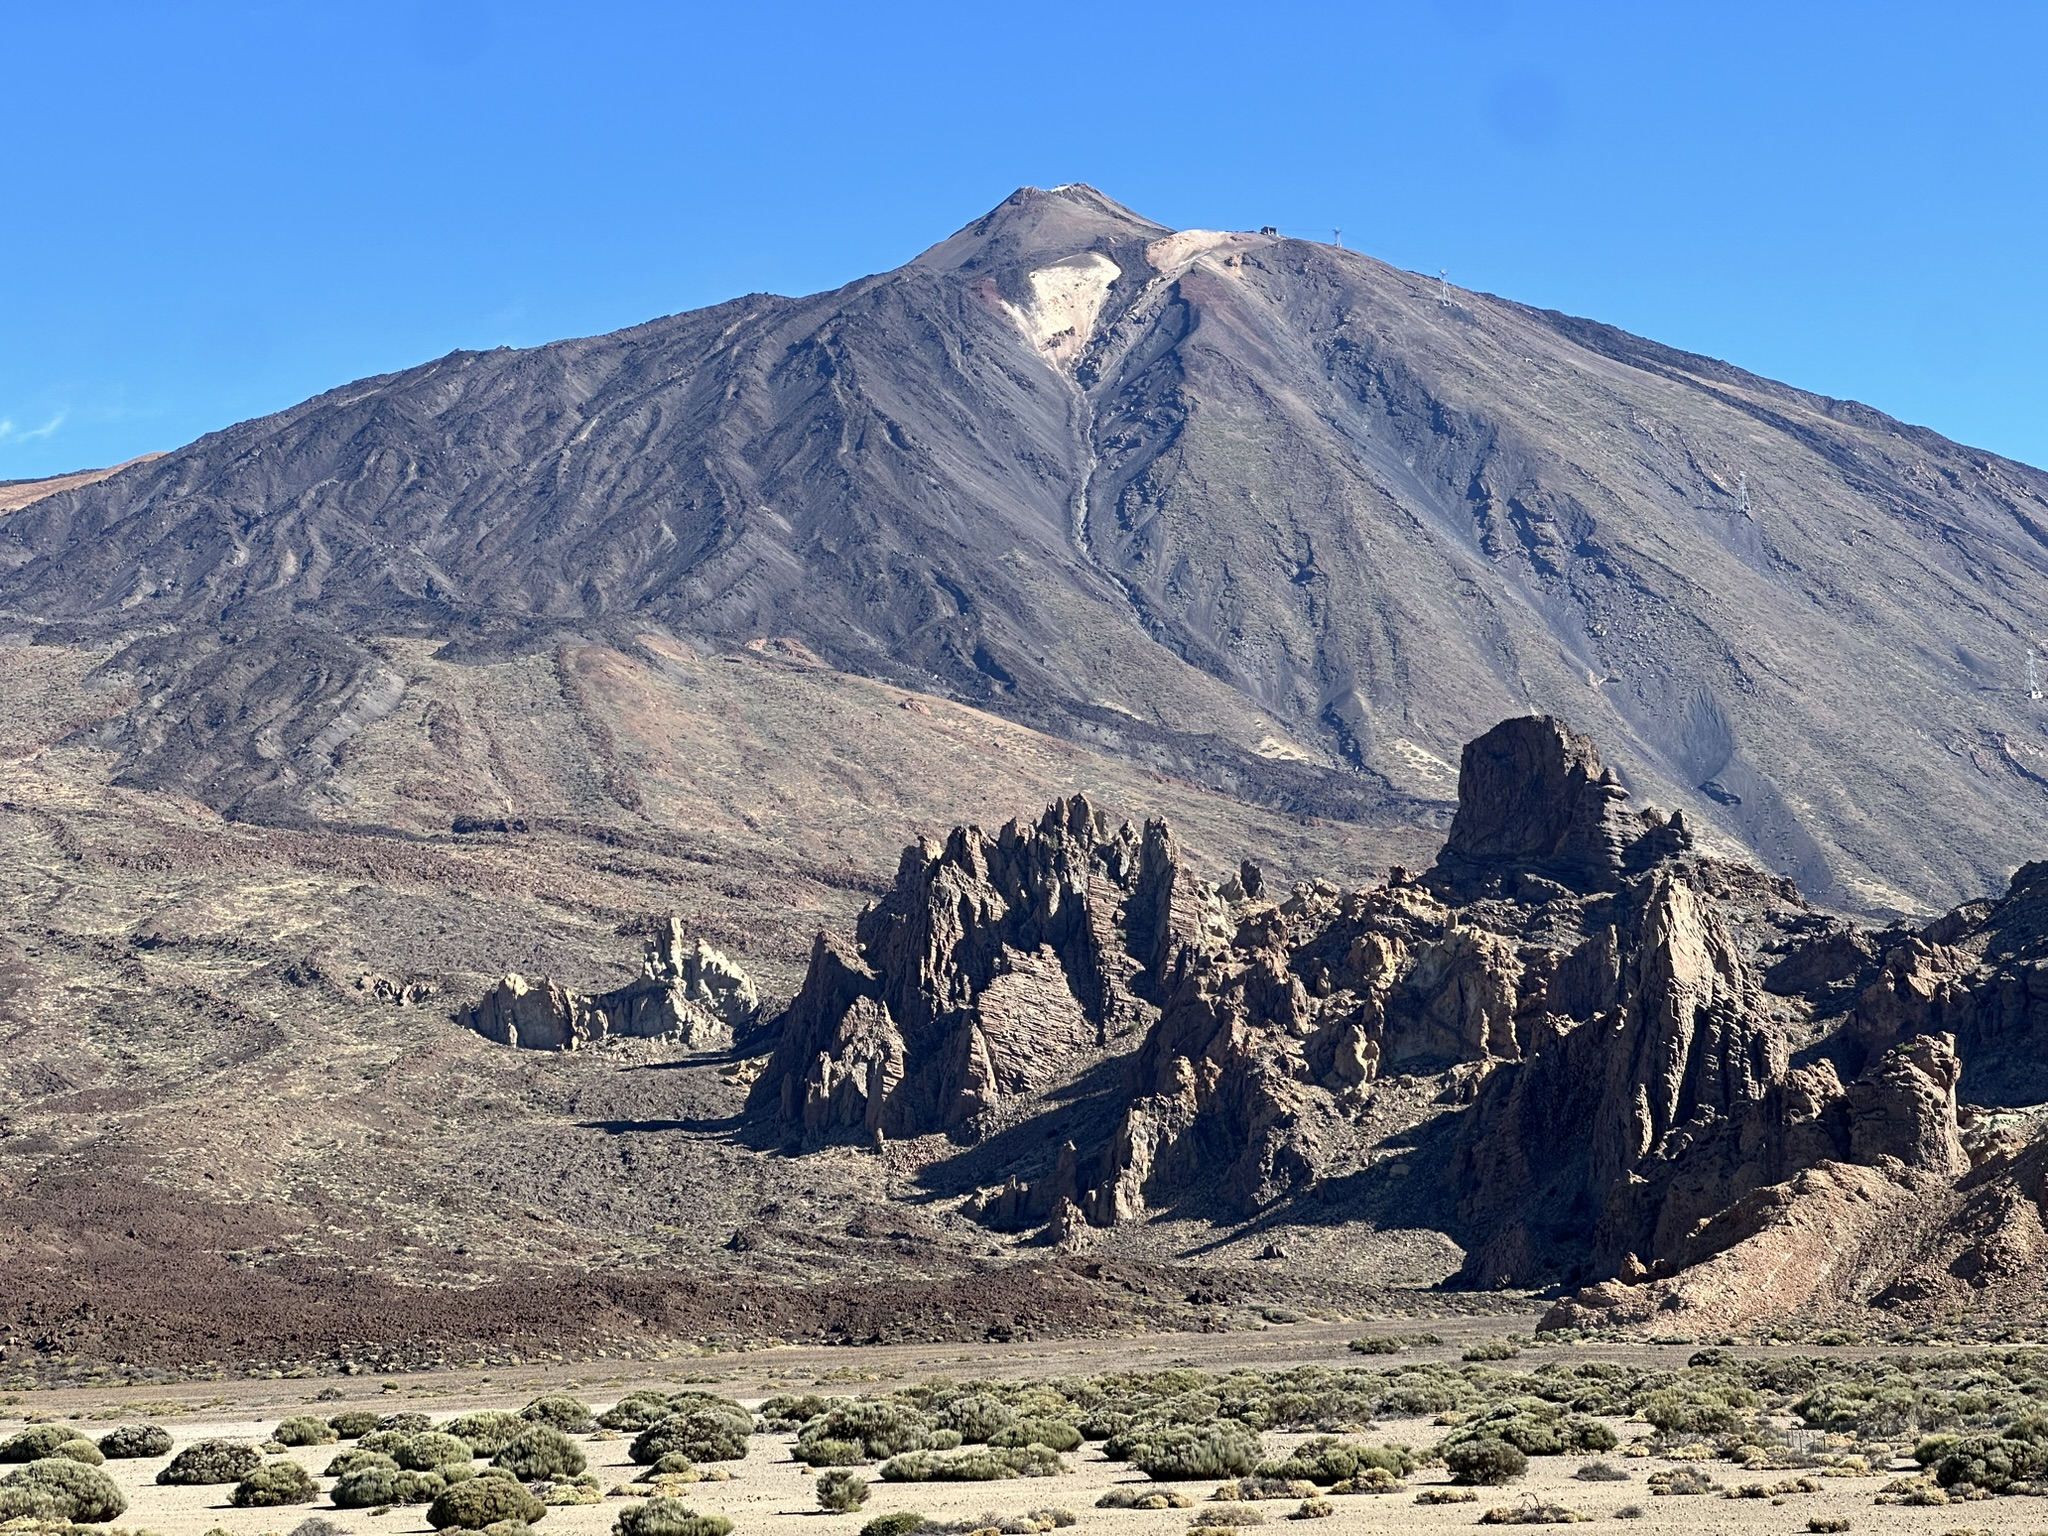 Climbing to Mount Teide’s Summit (3,715m) – Down Jacket? For Tenerife?